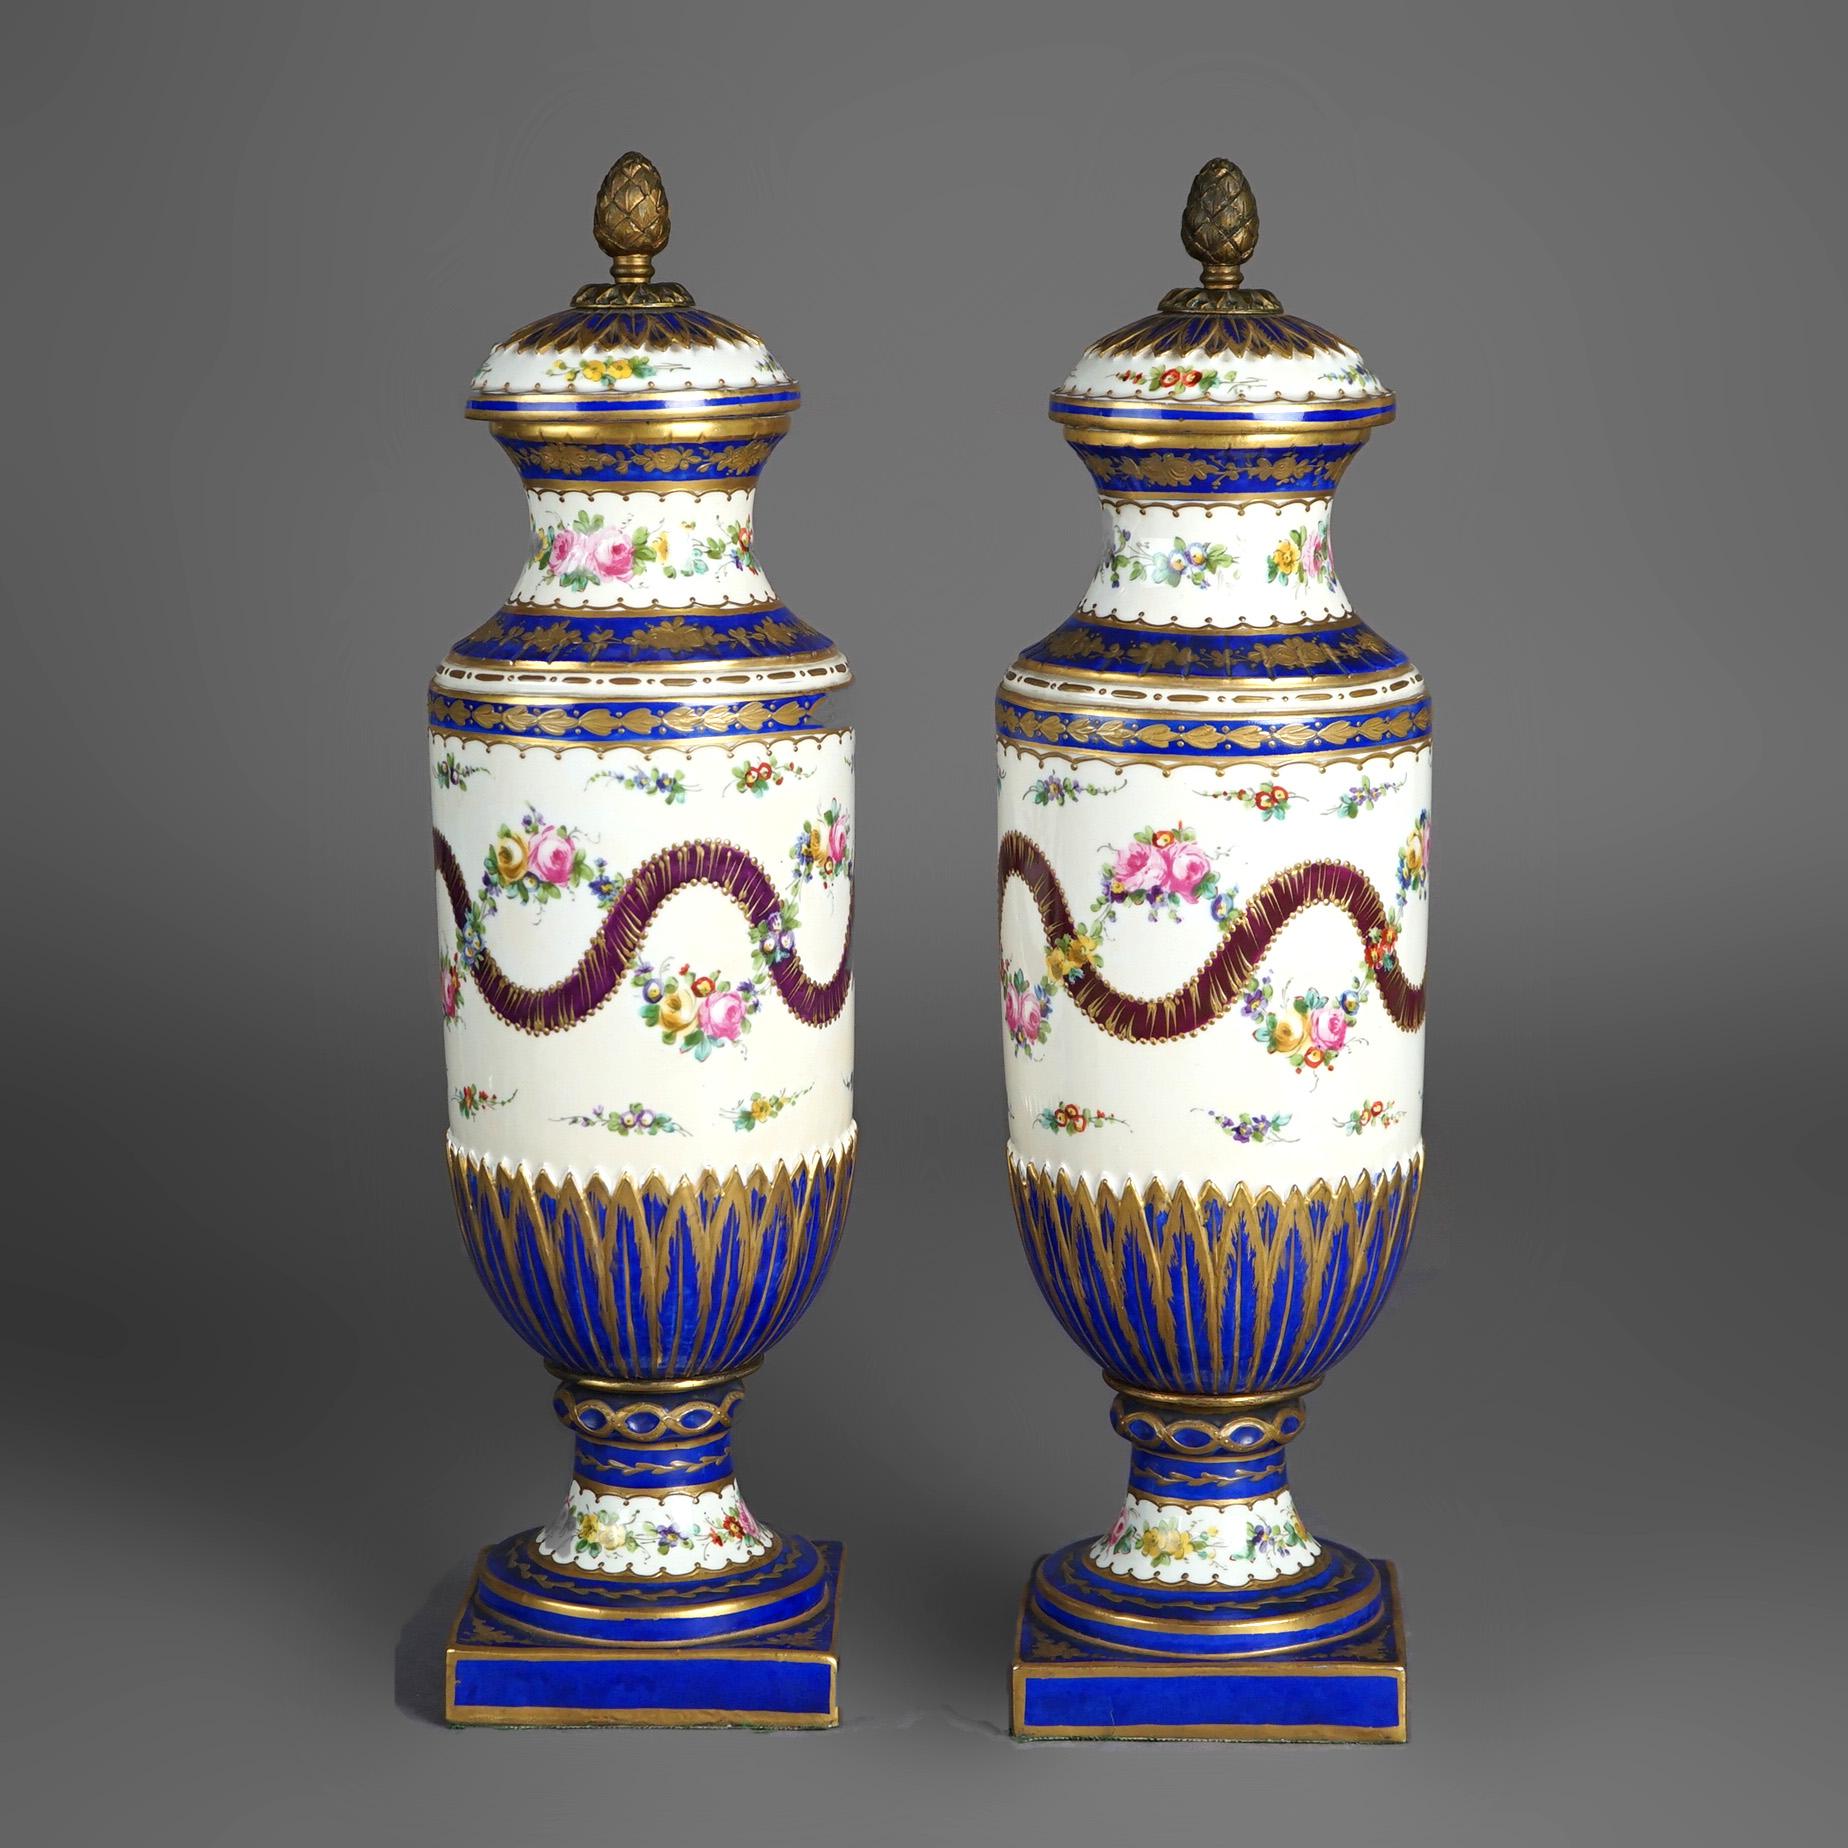 Antique Pair French Sevres Porcelain Hand Painted & Gilt Decorated Bolted Urns, c1890

Measures - 14.75